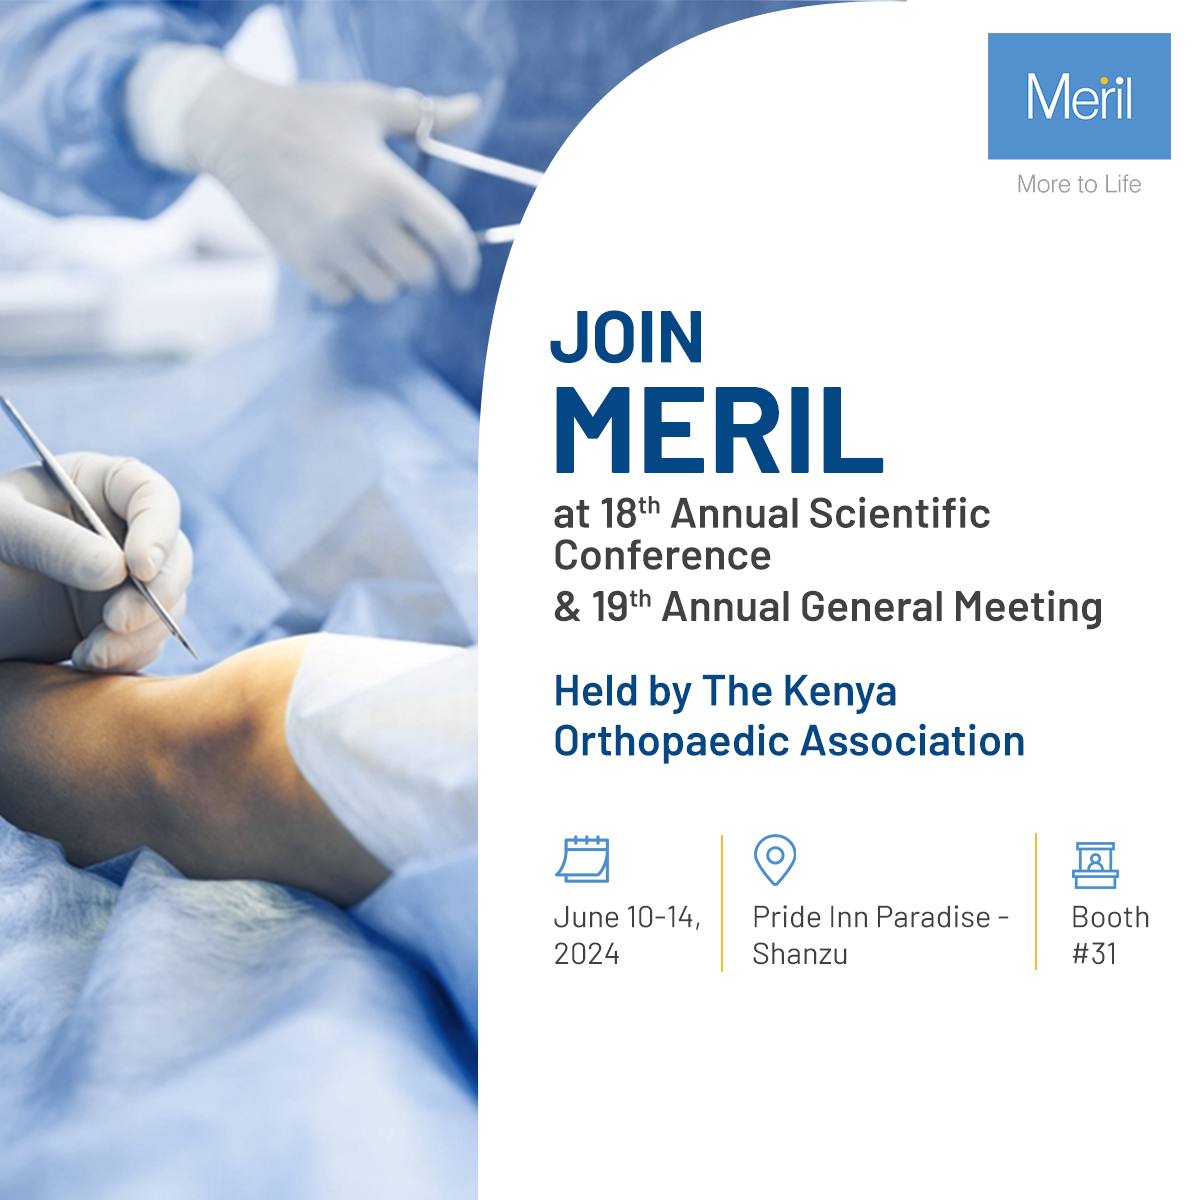 Join Meril at the 18th Annual Scientific Conference and 19th Annual General Meeting of The Kenya Orthopaedic Association